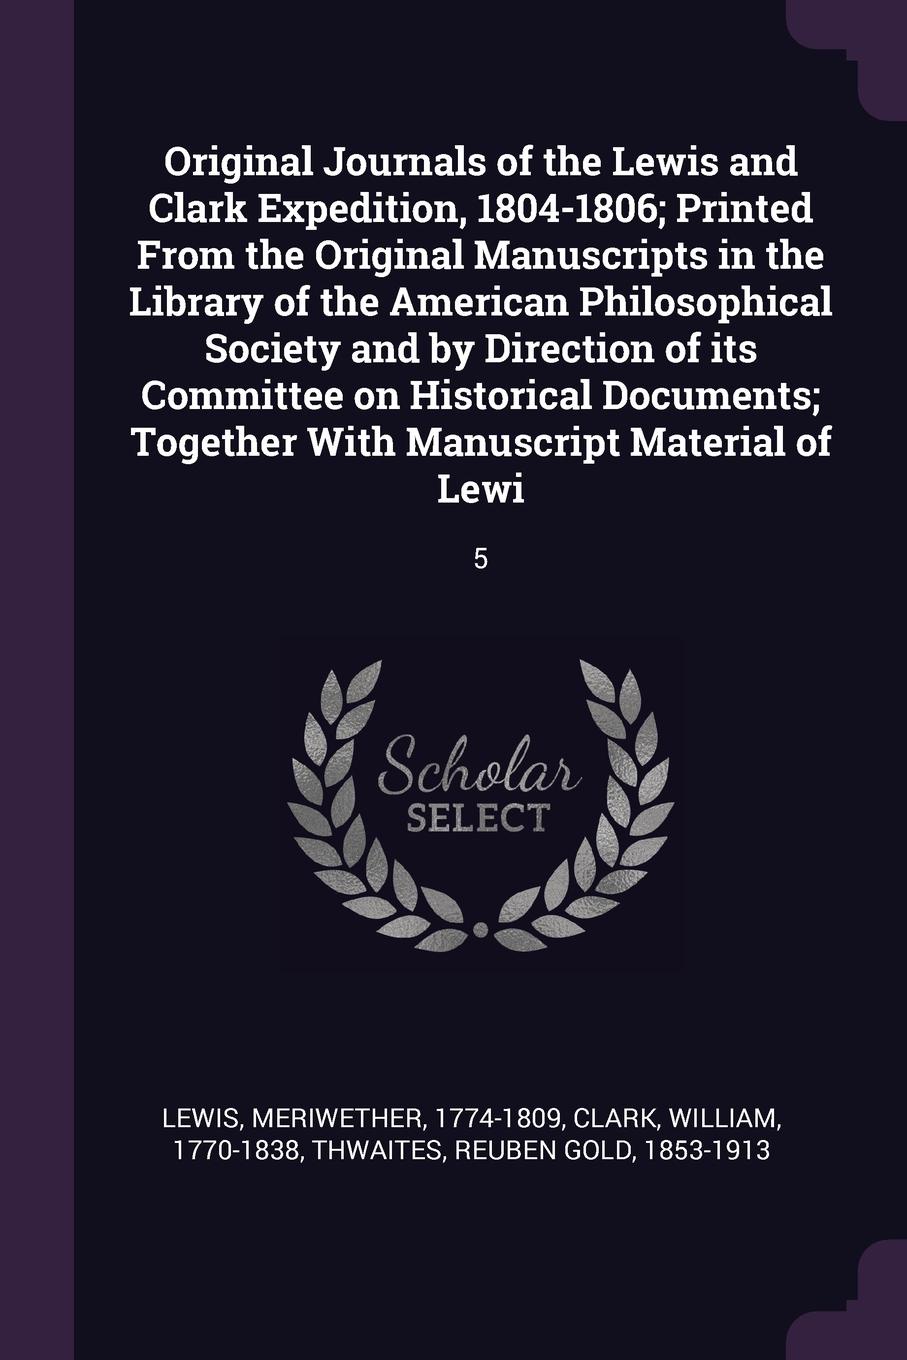 Original Journals of the Lewis and Clark Expedition, 1804-1806; Printed From the Original Manuscripts in the Library of the American Philosophical Society and by Direction of its Committee on Historical Documents; Together With Manuscript Material...